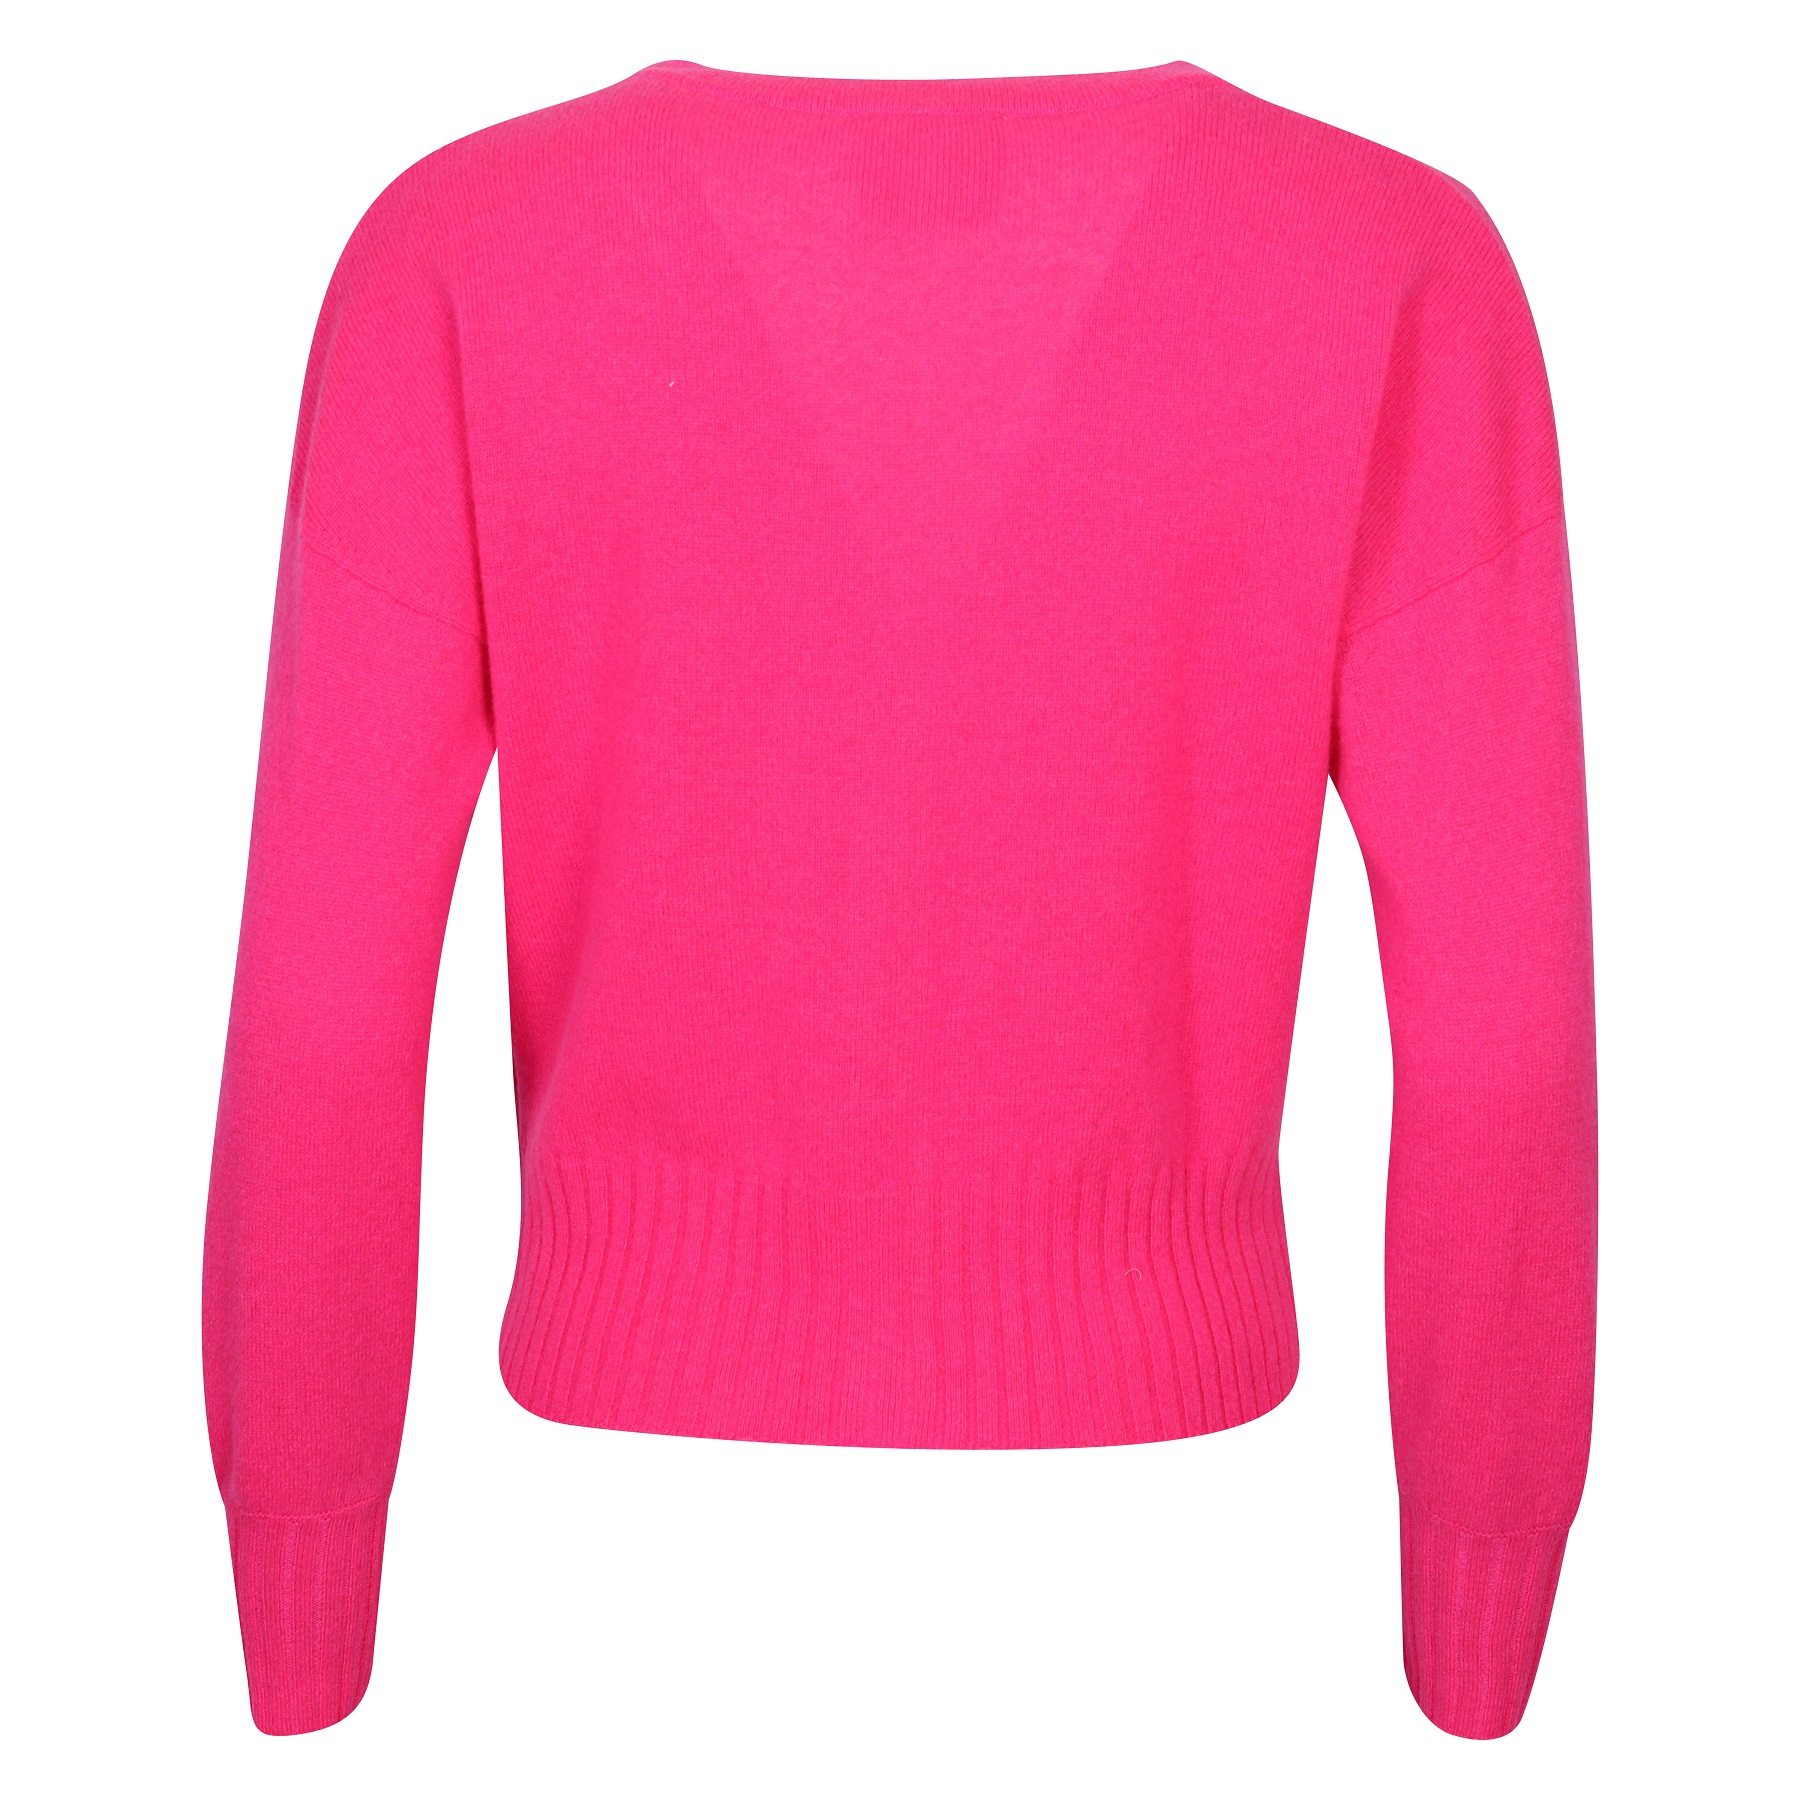 Absolut Cashmere Cardigan in Pink S